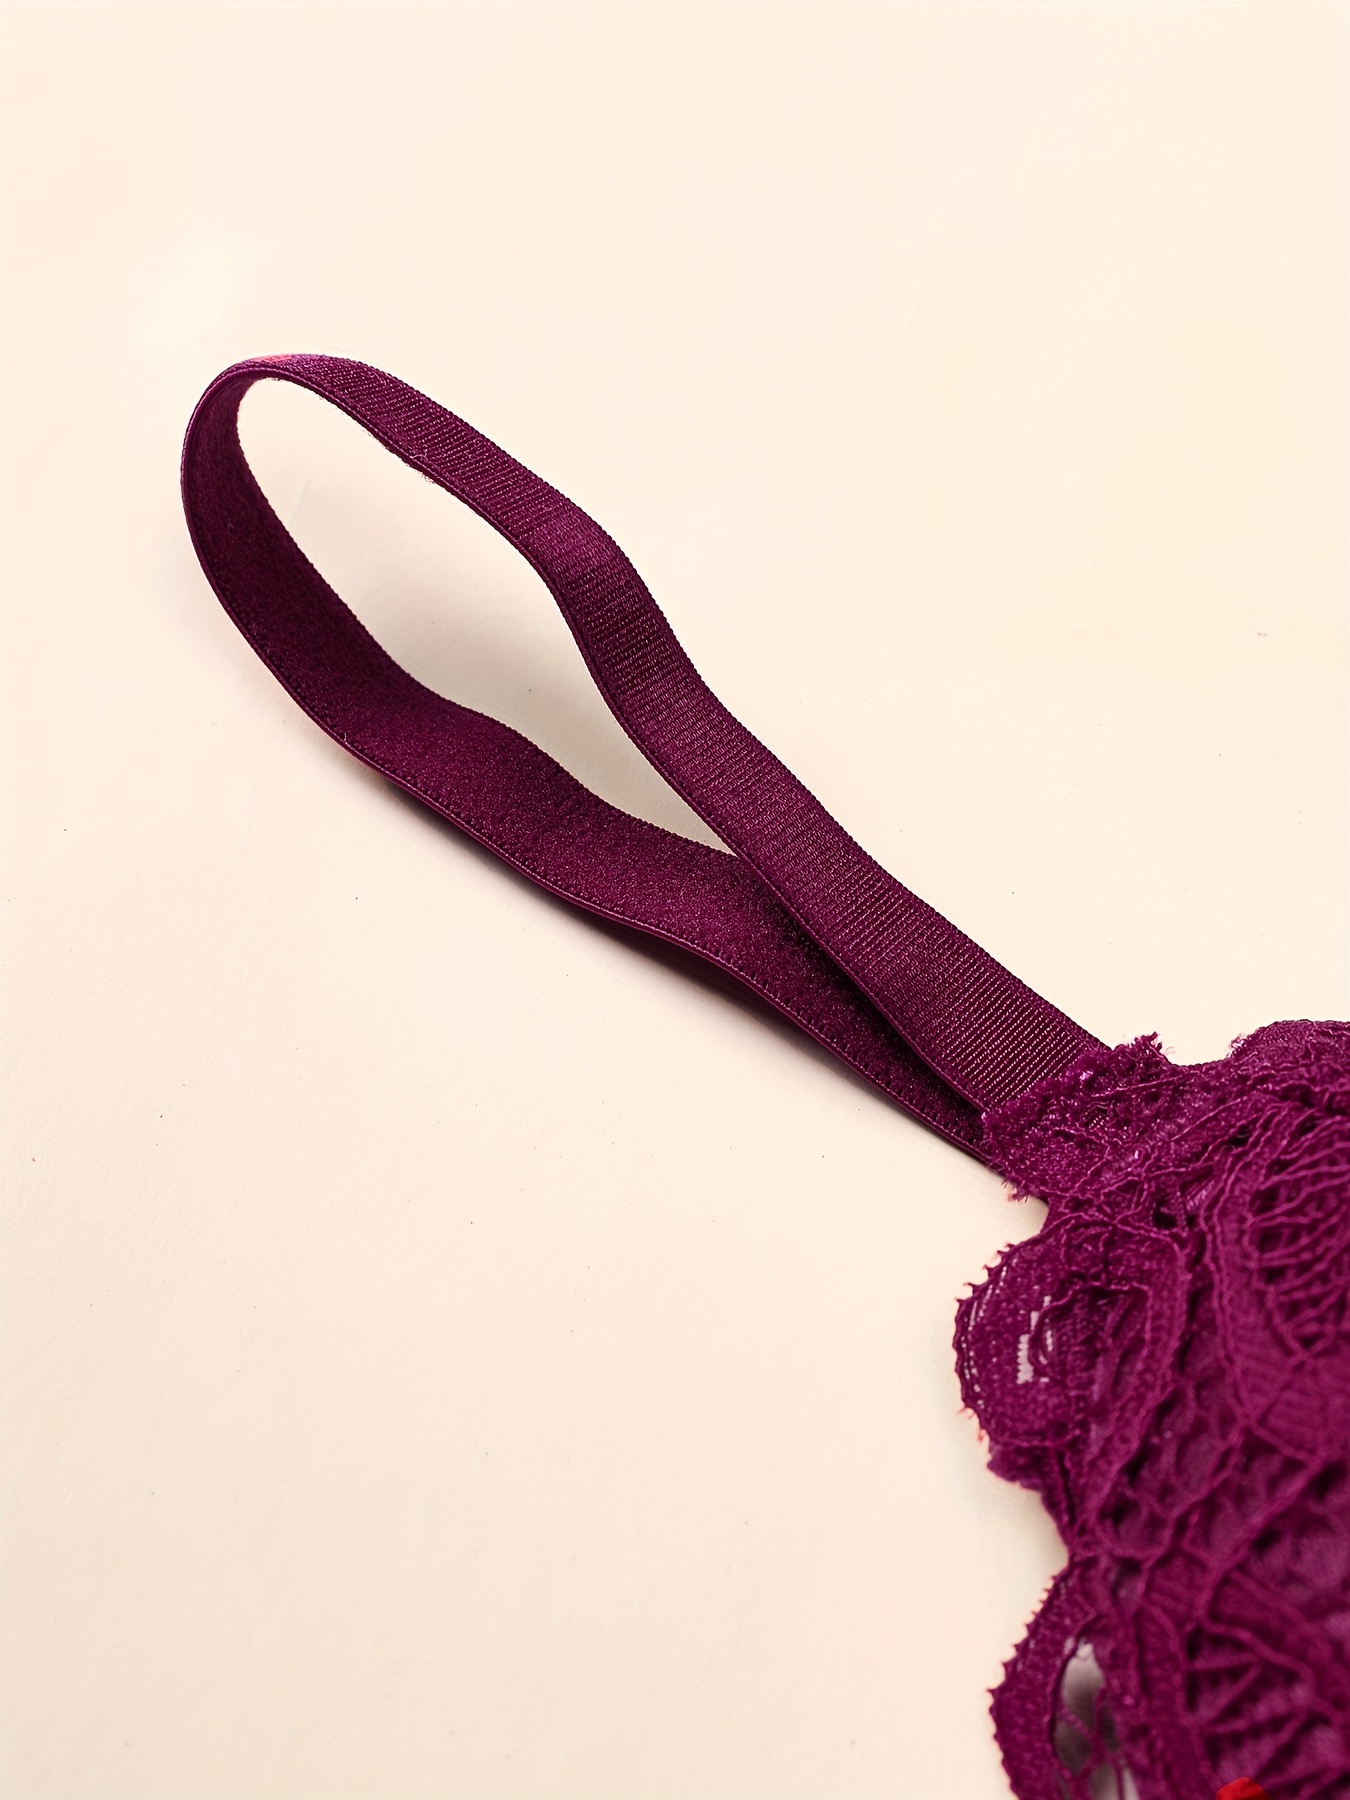 Stylish Burgundy Lace Halter Bralette with Removable Pads